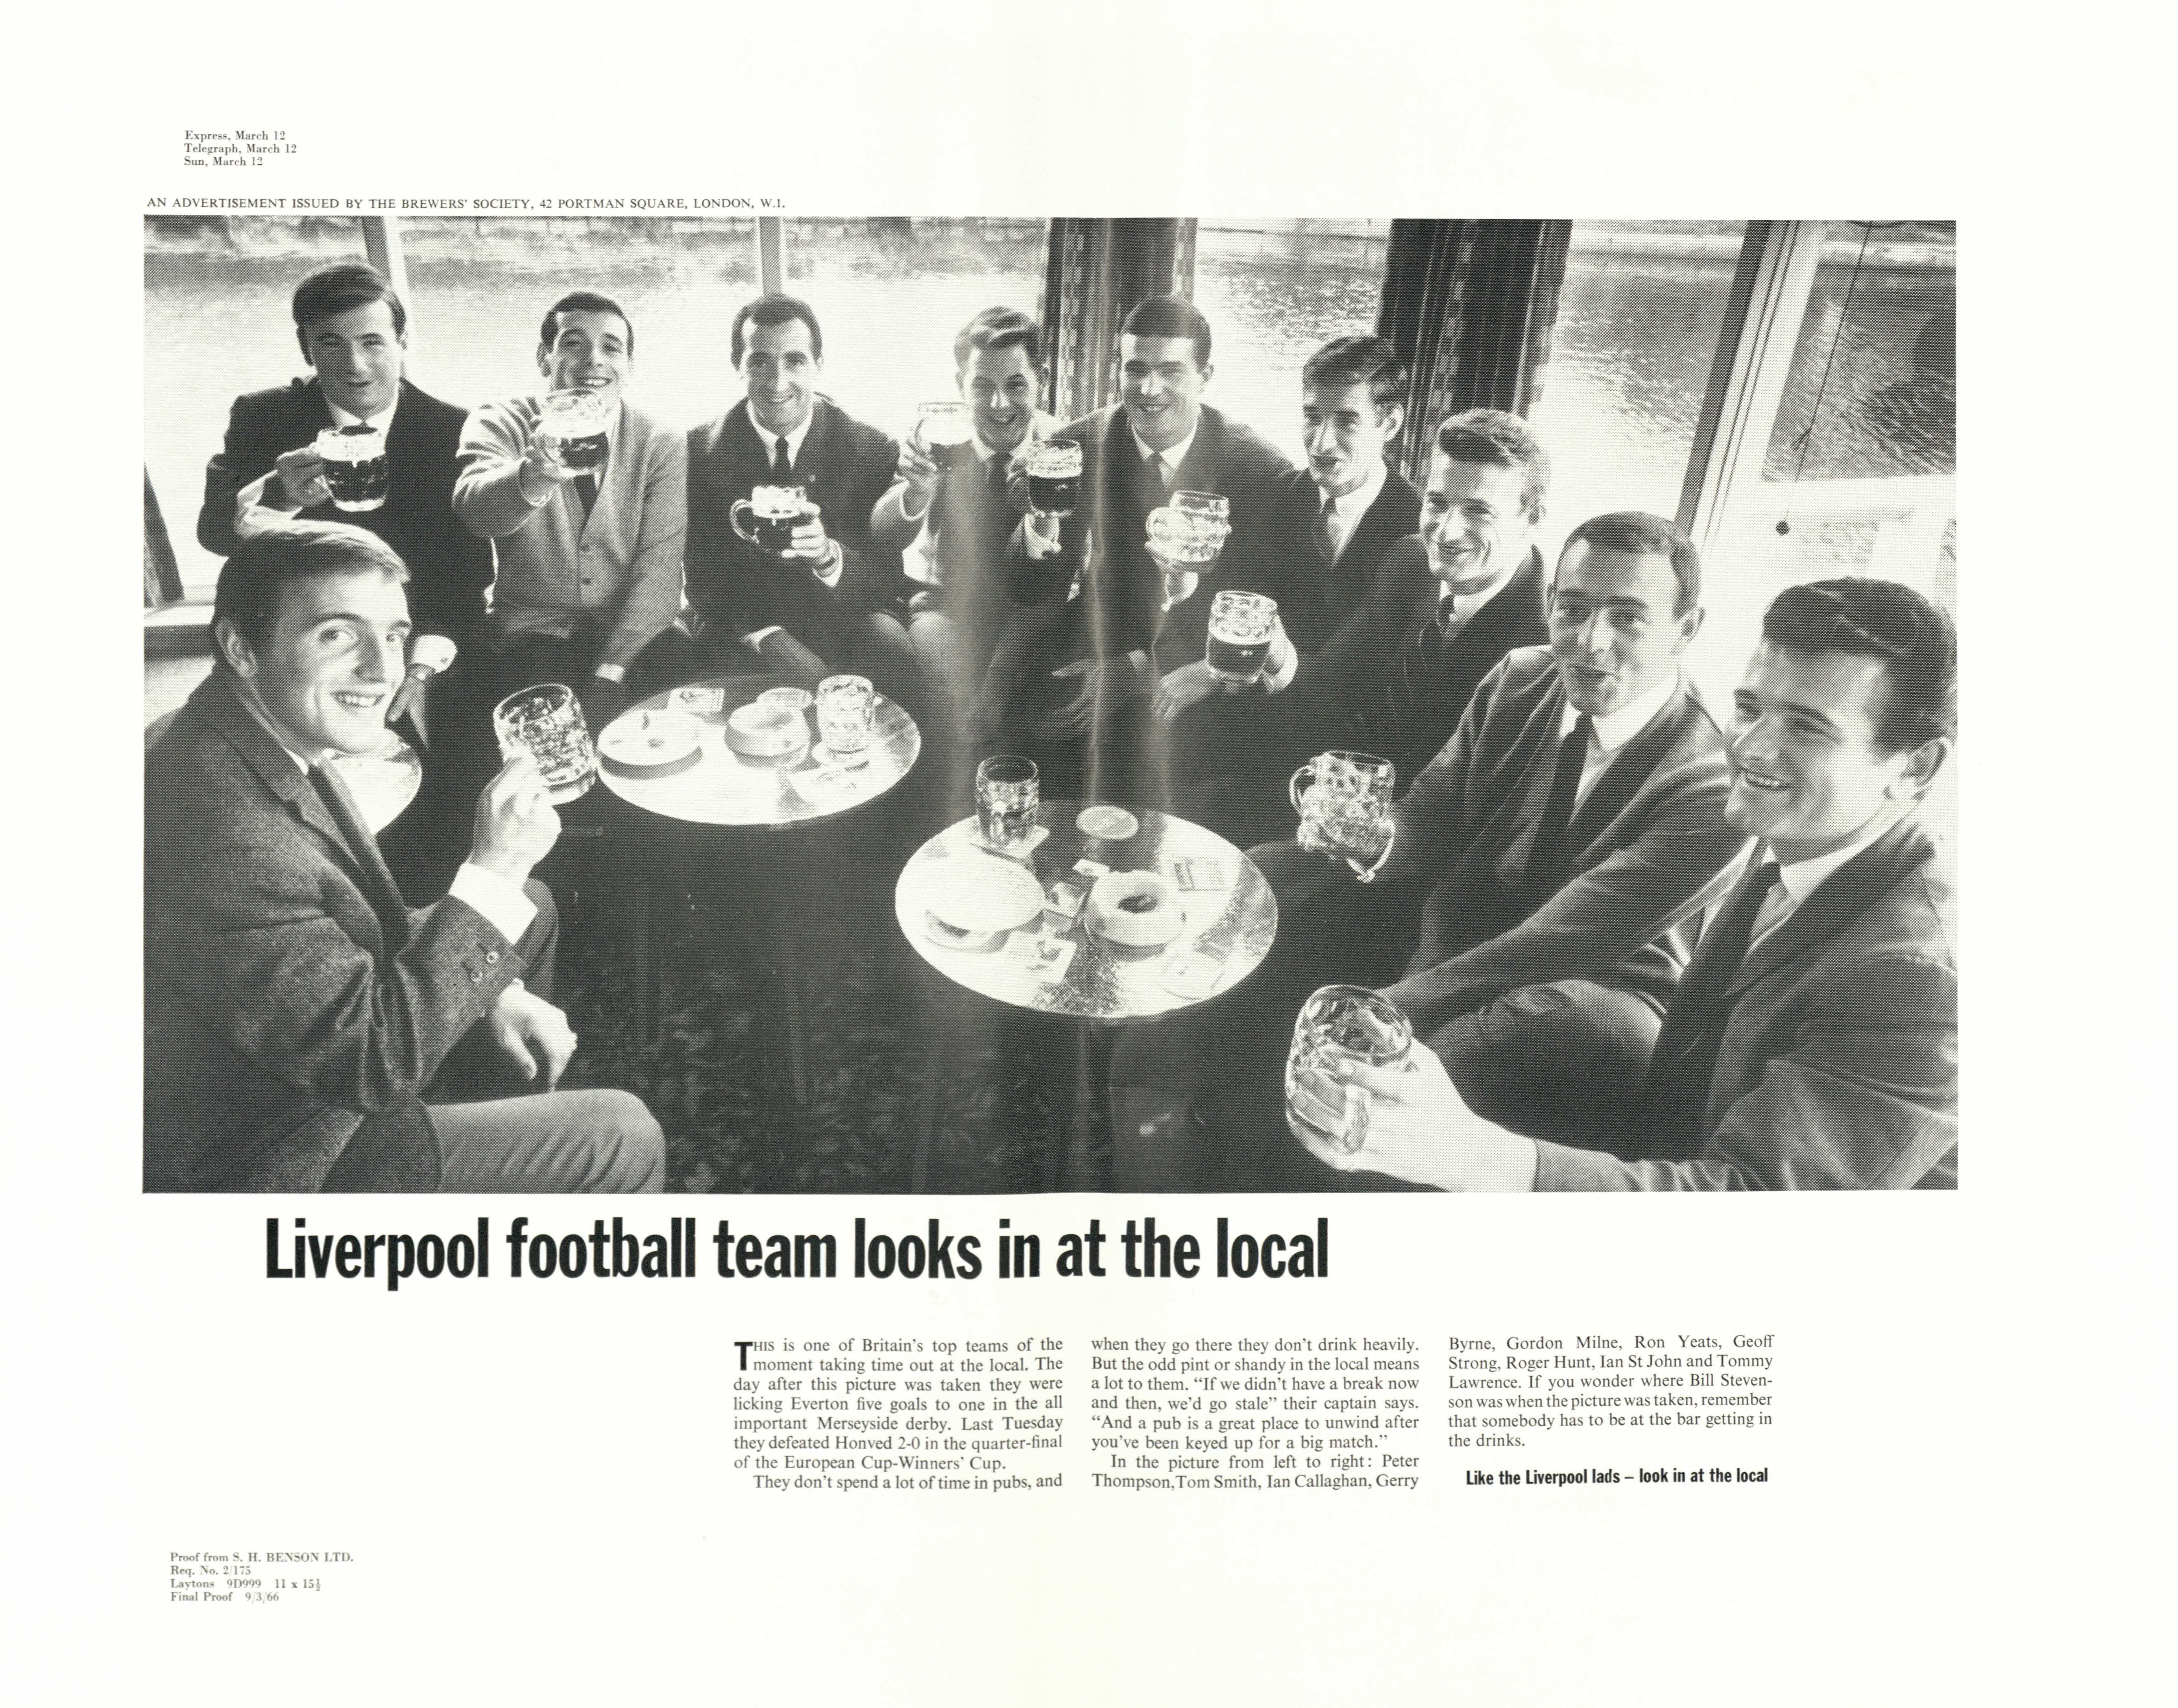 Liverpool football team looks in at the local, 1966